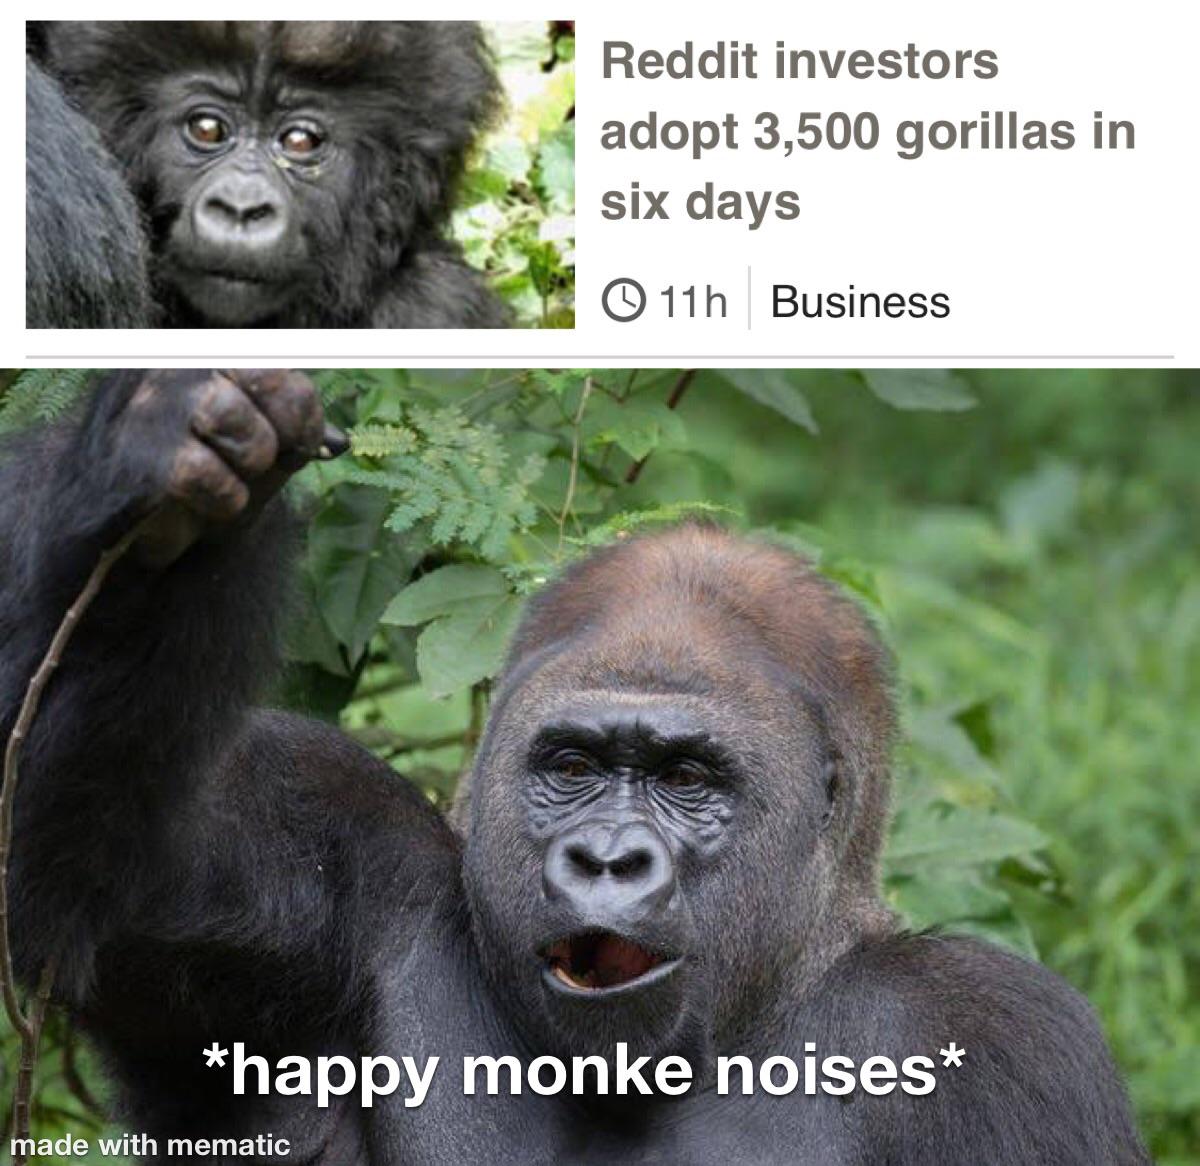 fauna - Reddit investors adopt 3,500 gorillas in six days 11h Business happy monke noises made with mematic